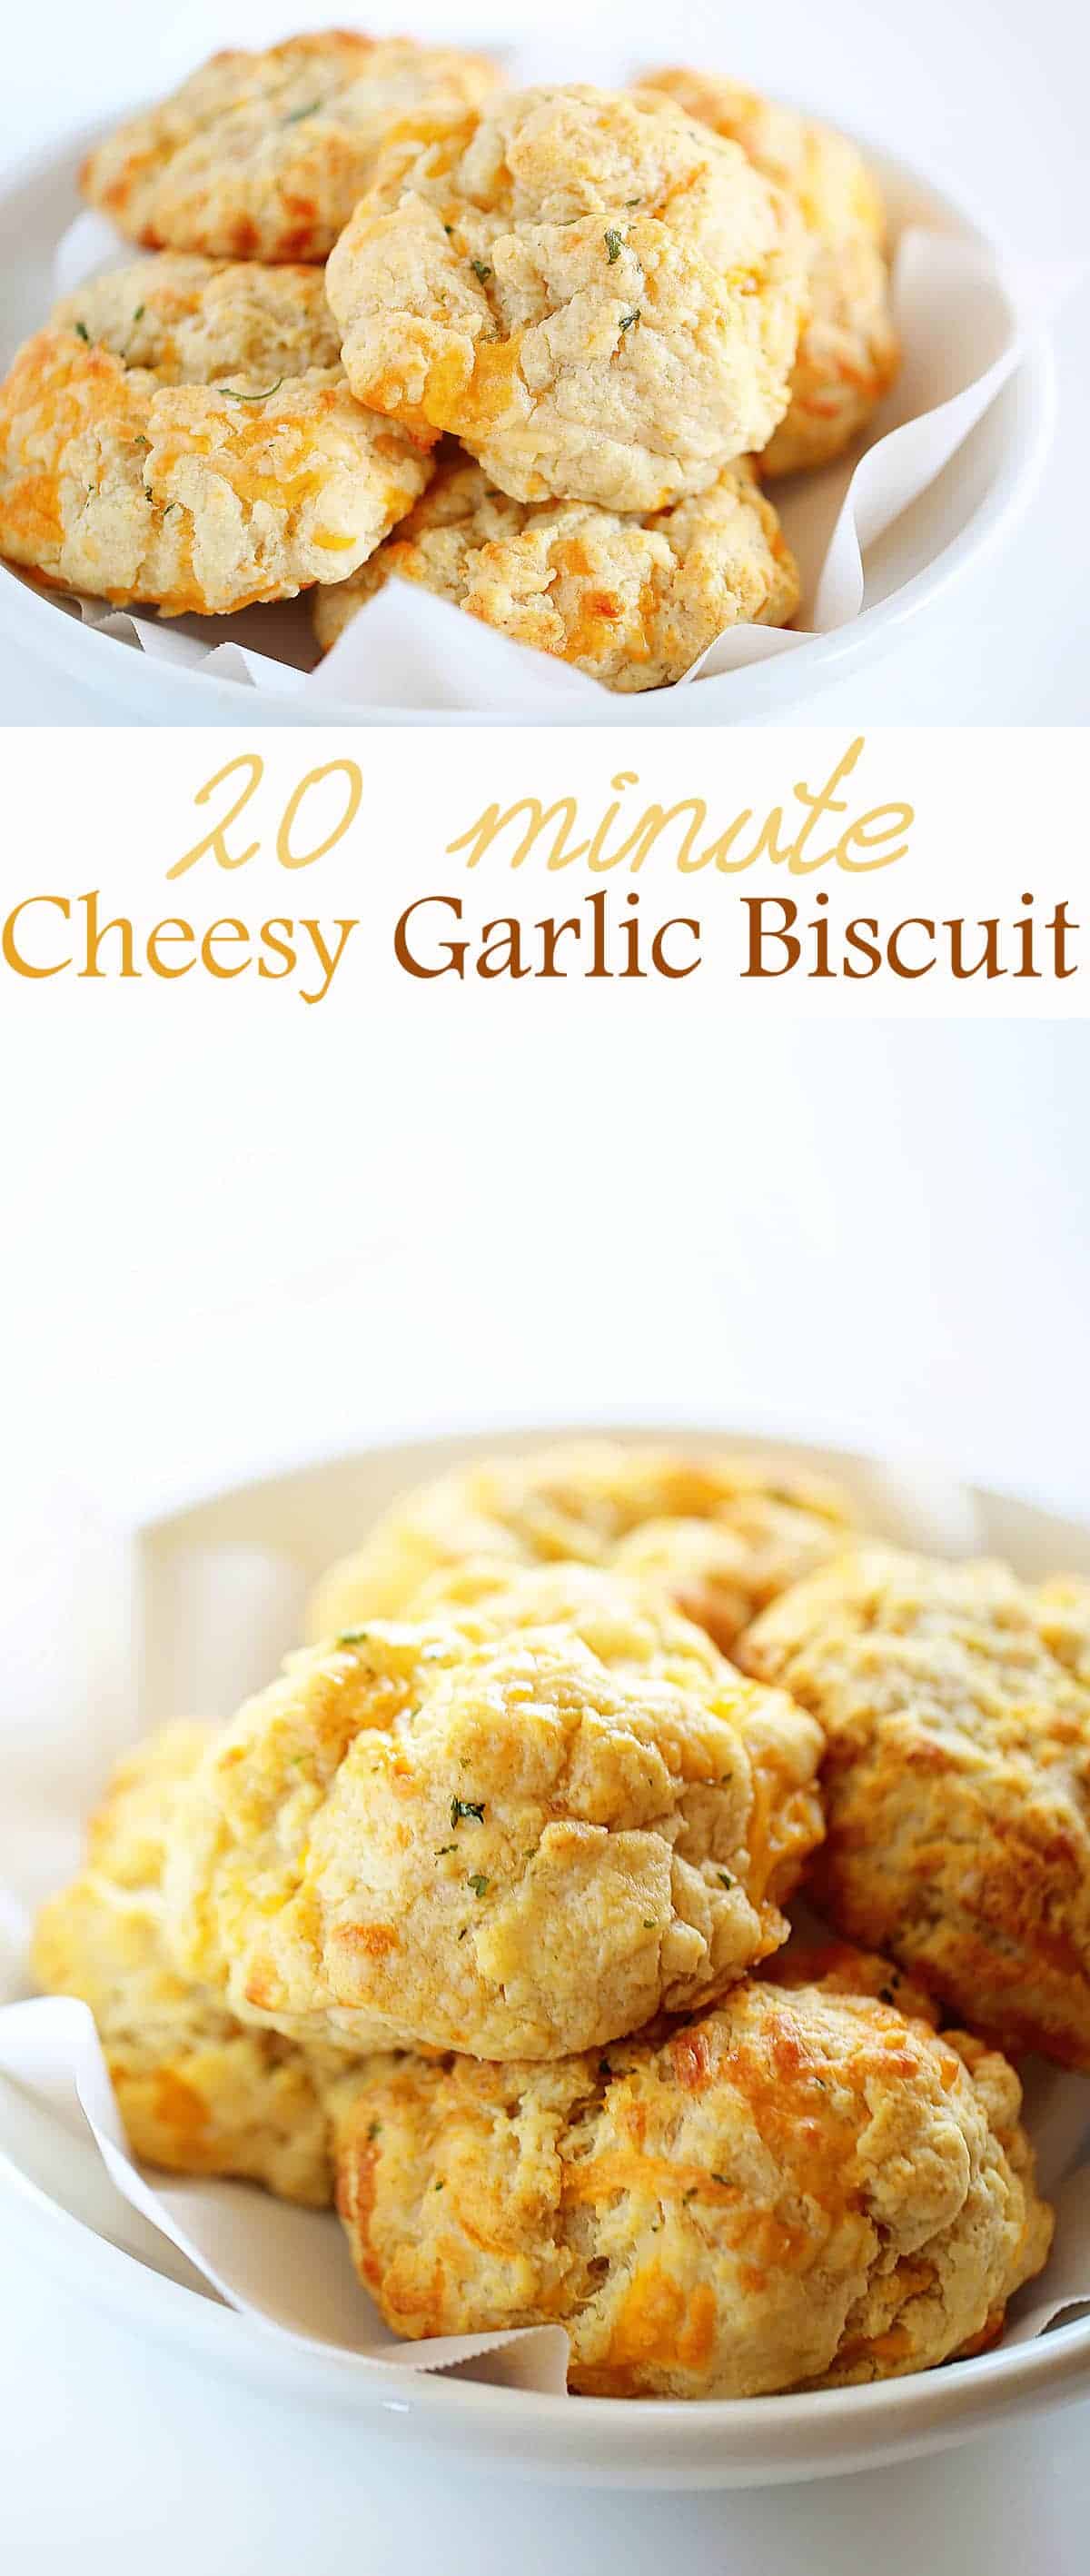 No one ever has to know it only took 20 minutes to make these MOUTHWATERING biscuits!